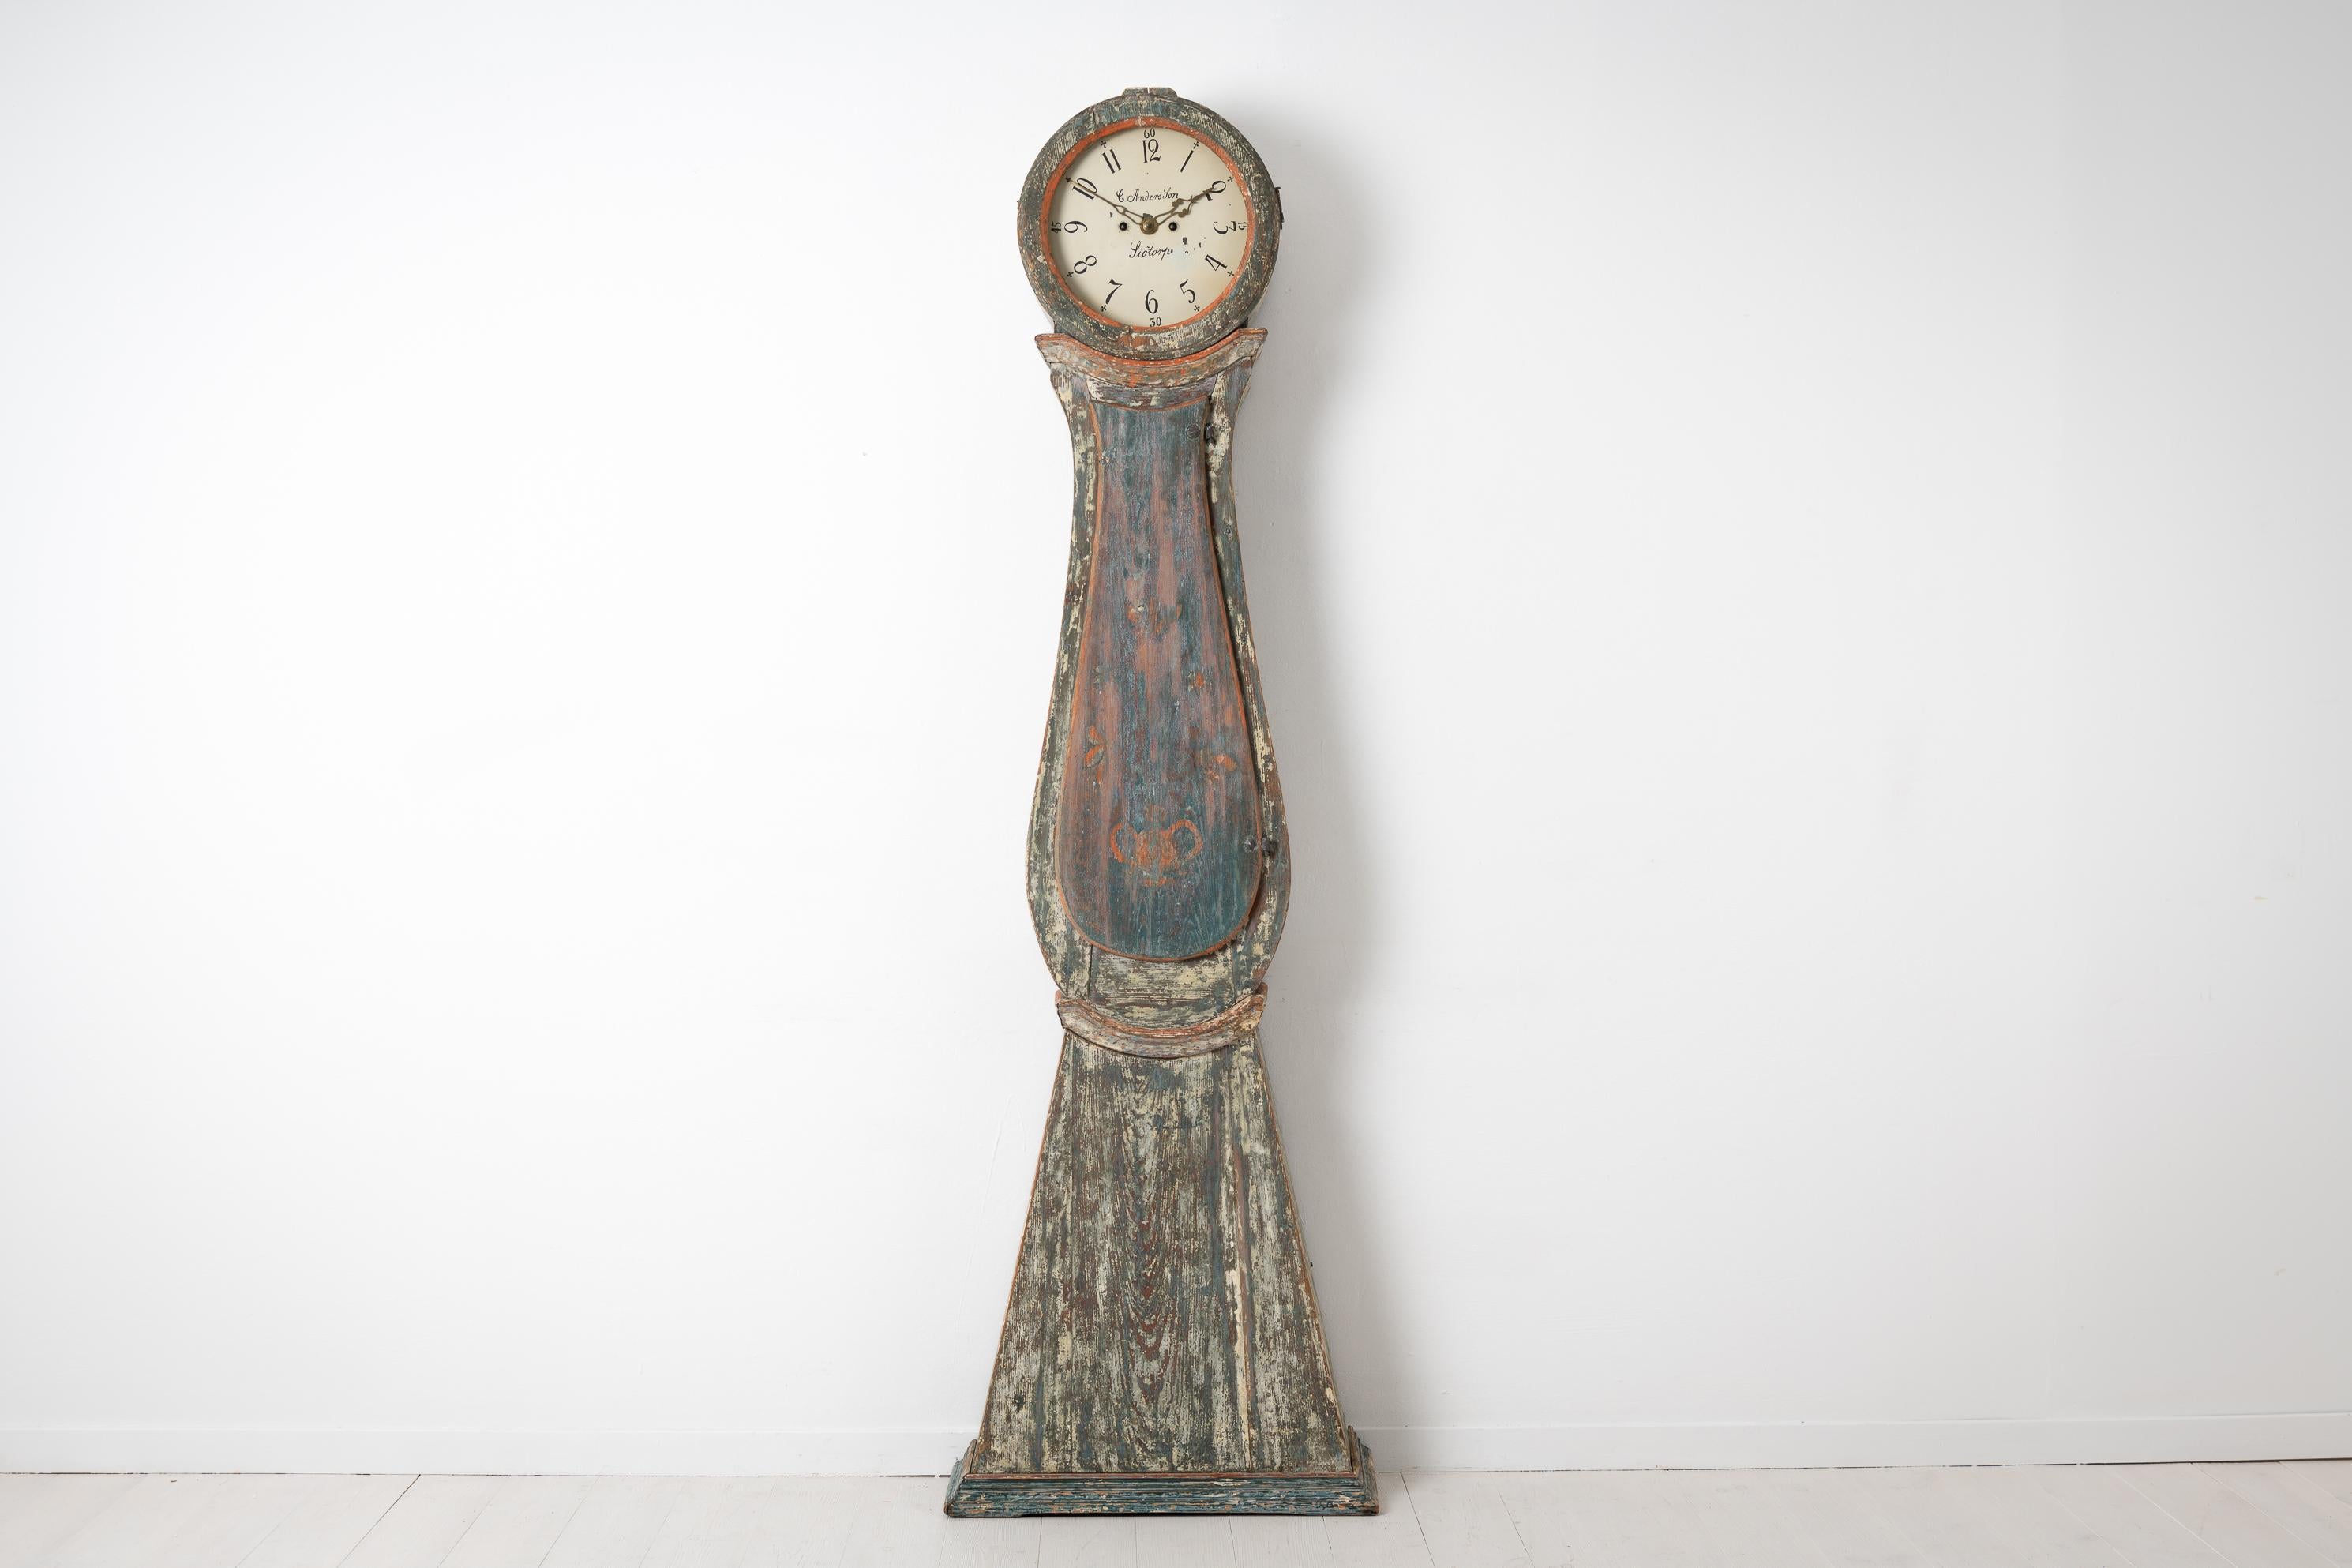 Hand-Crafted Swedish Long Case Clock in Tones of Blue and Green